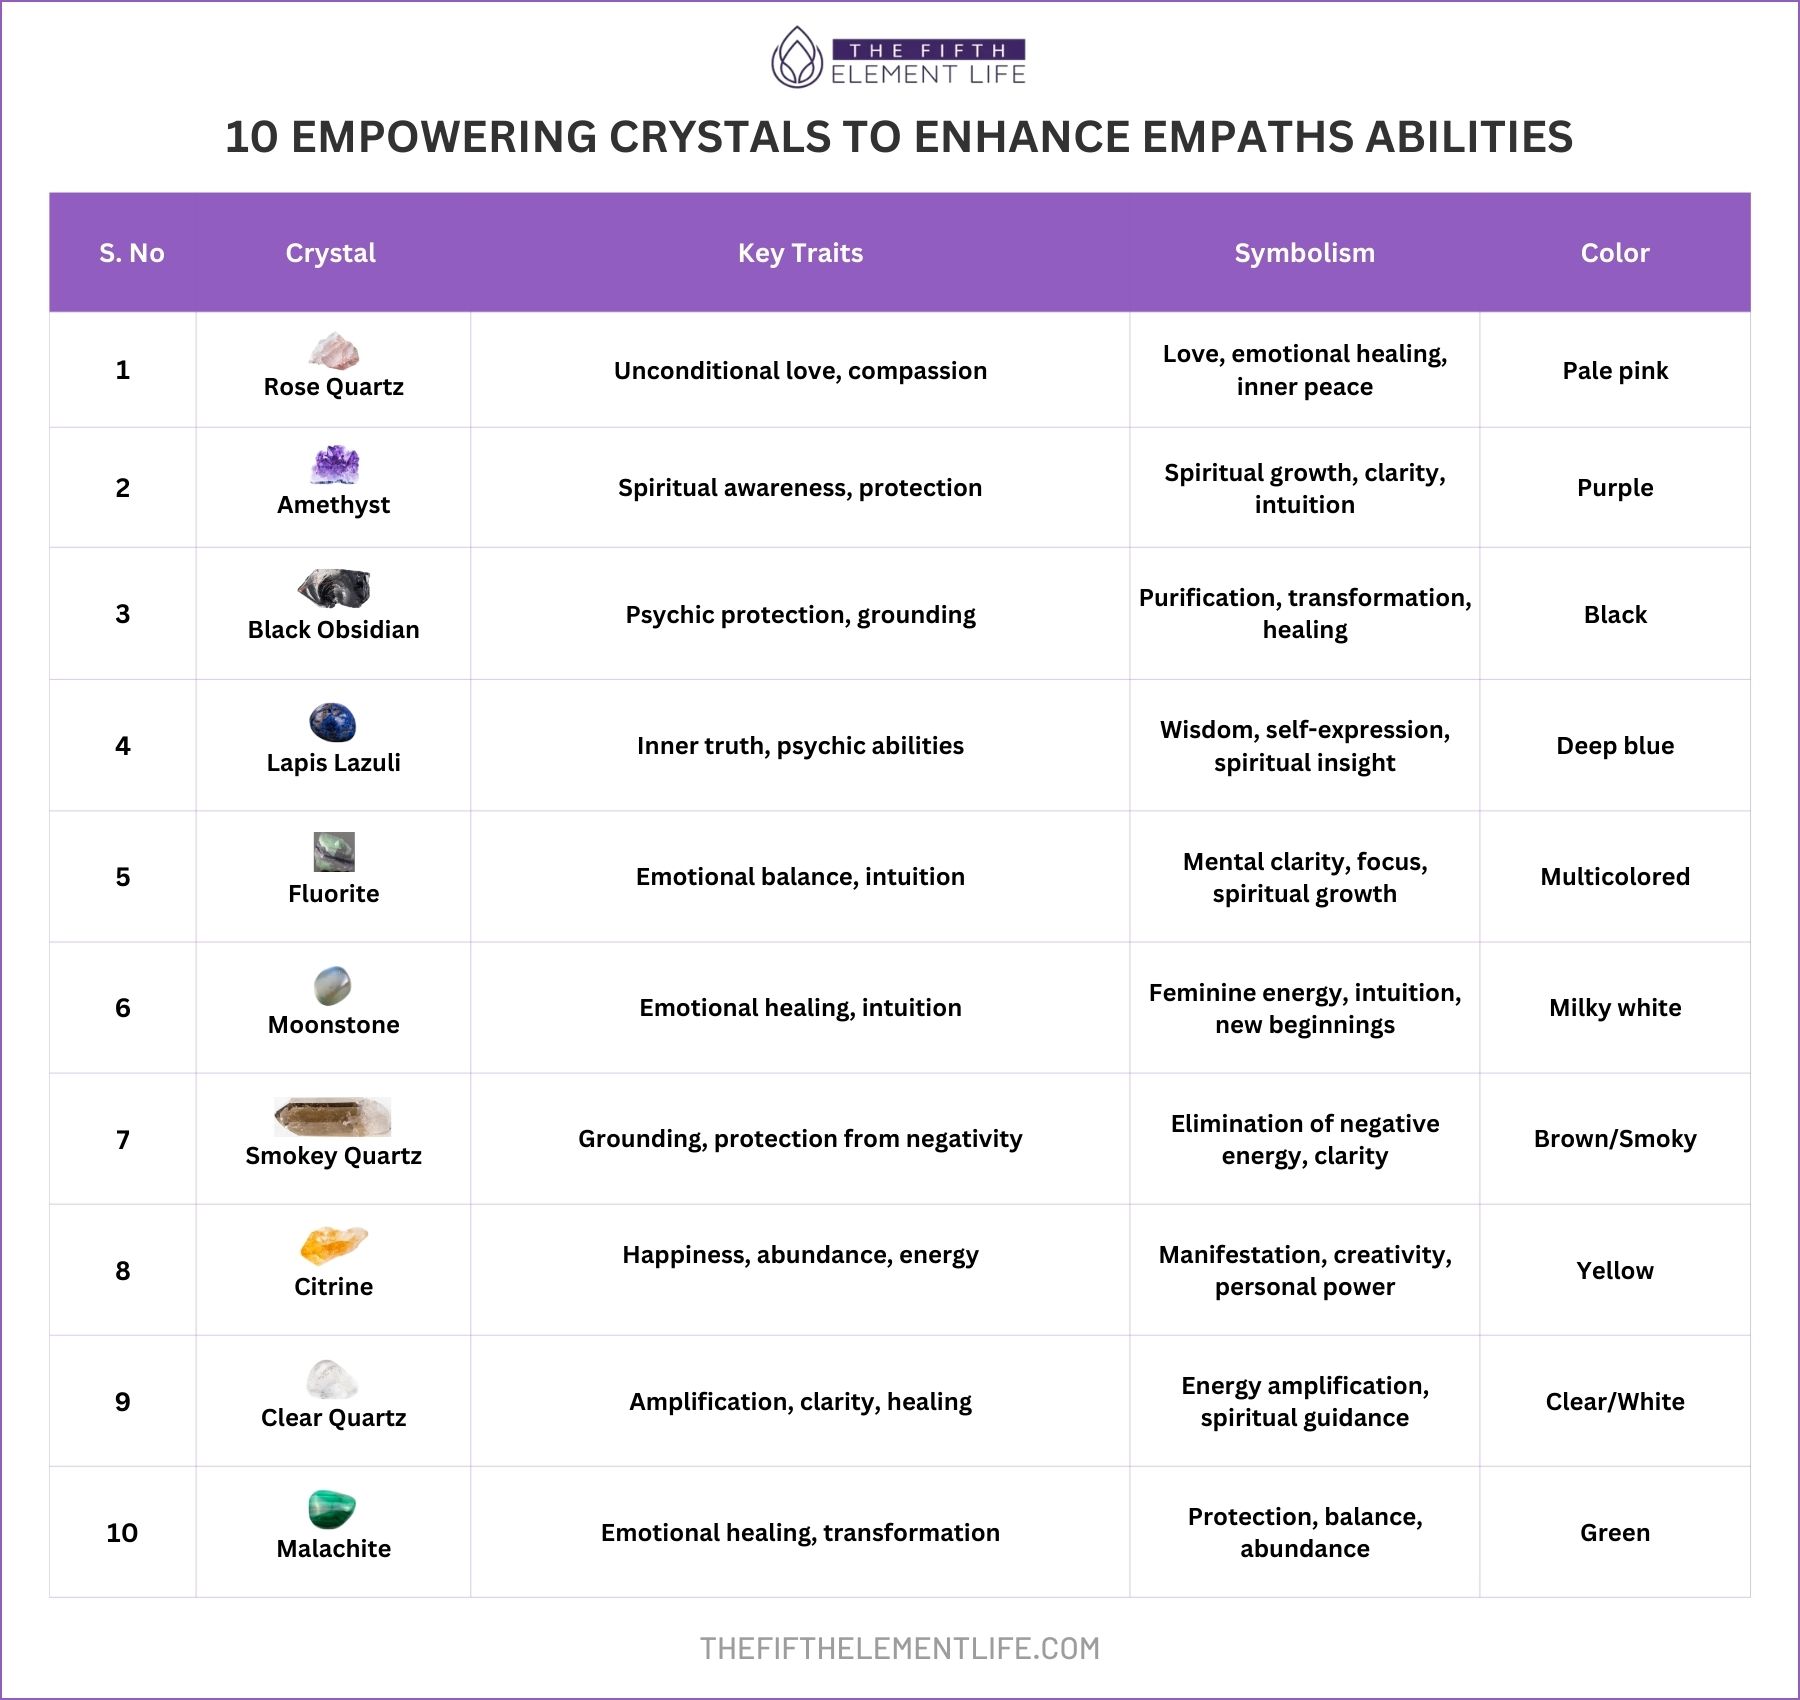 10 Empowering Crystals To Enhance Empaths Abilities